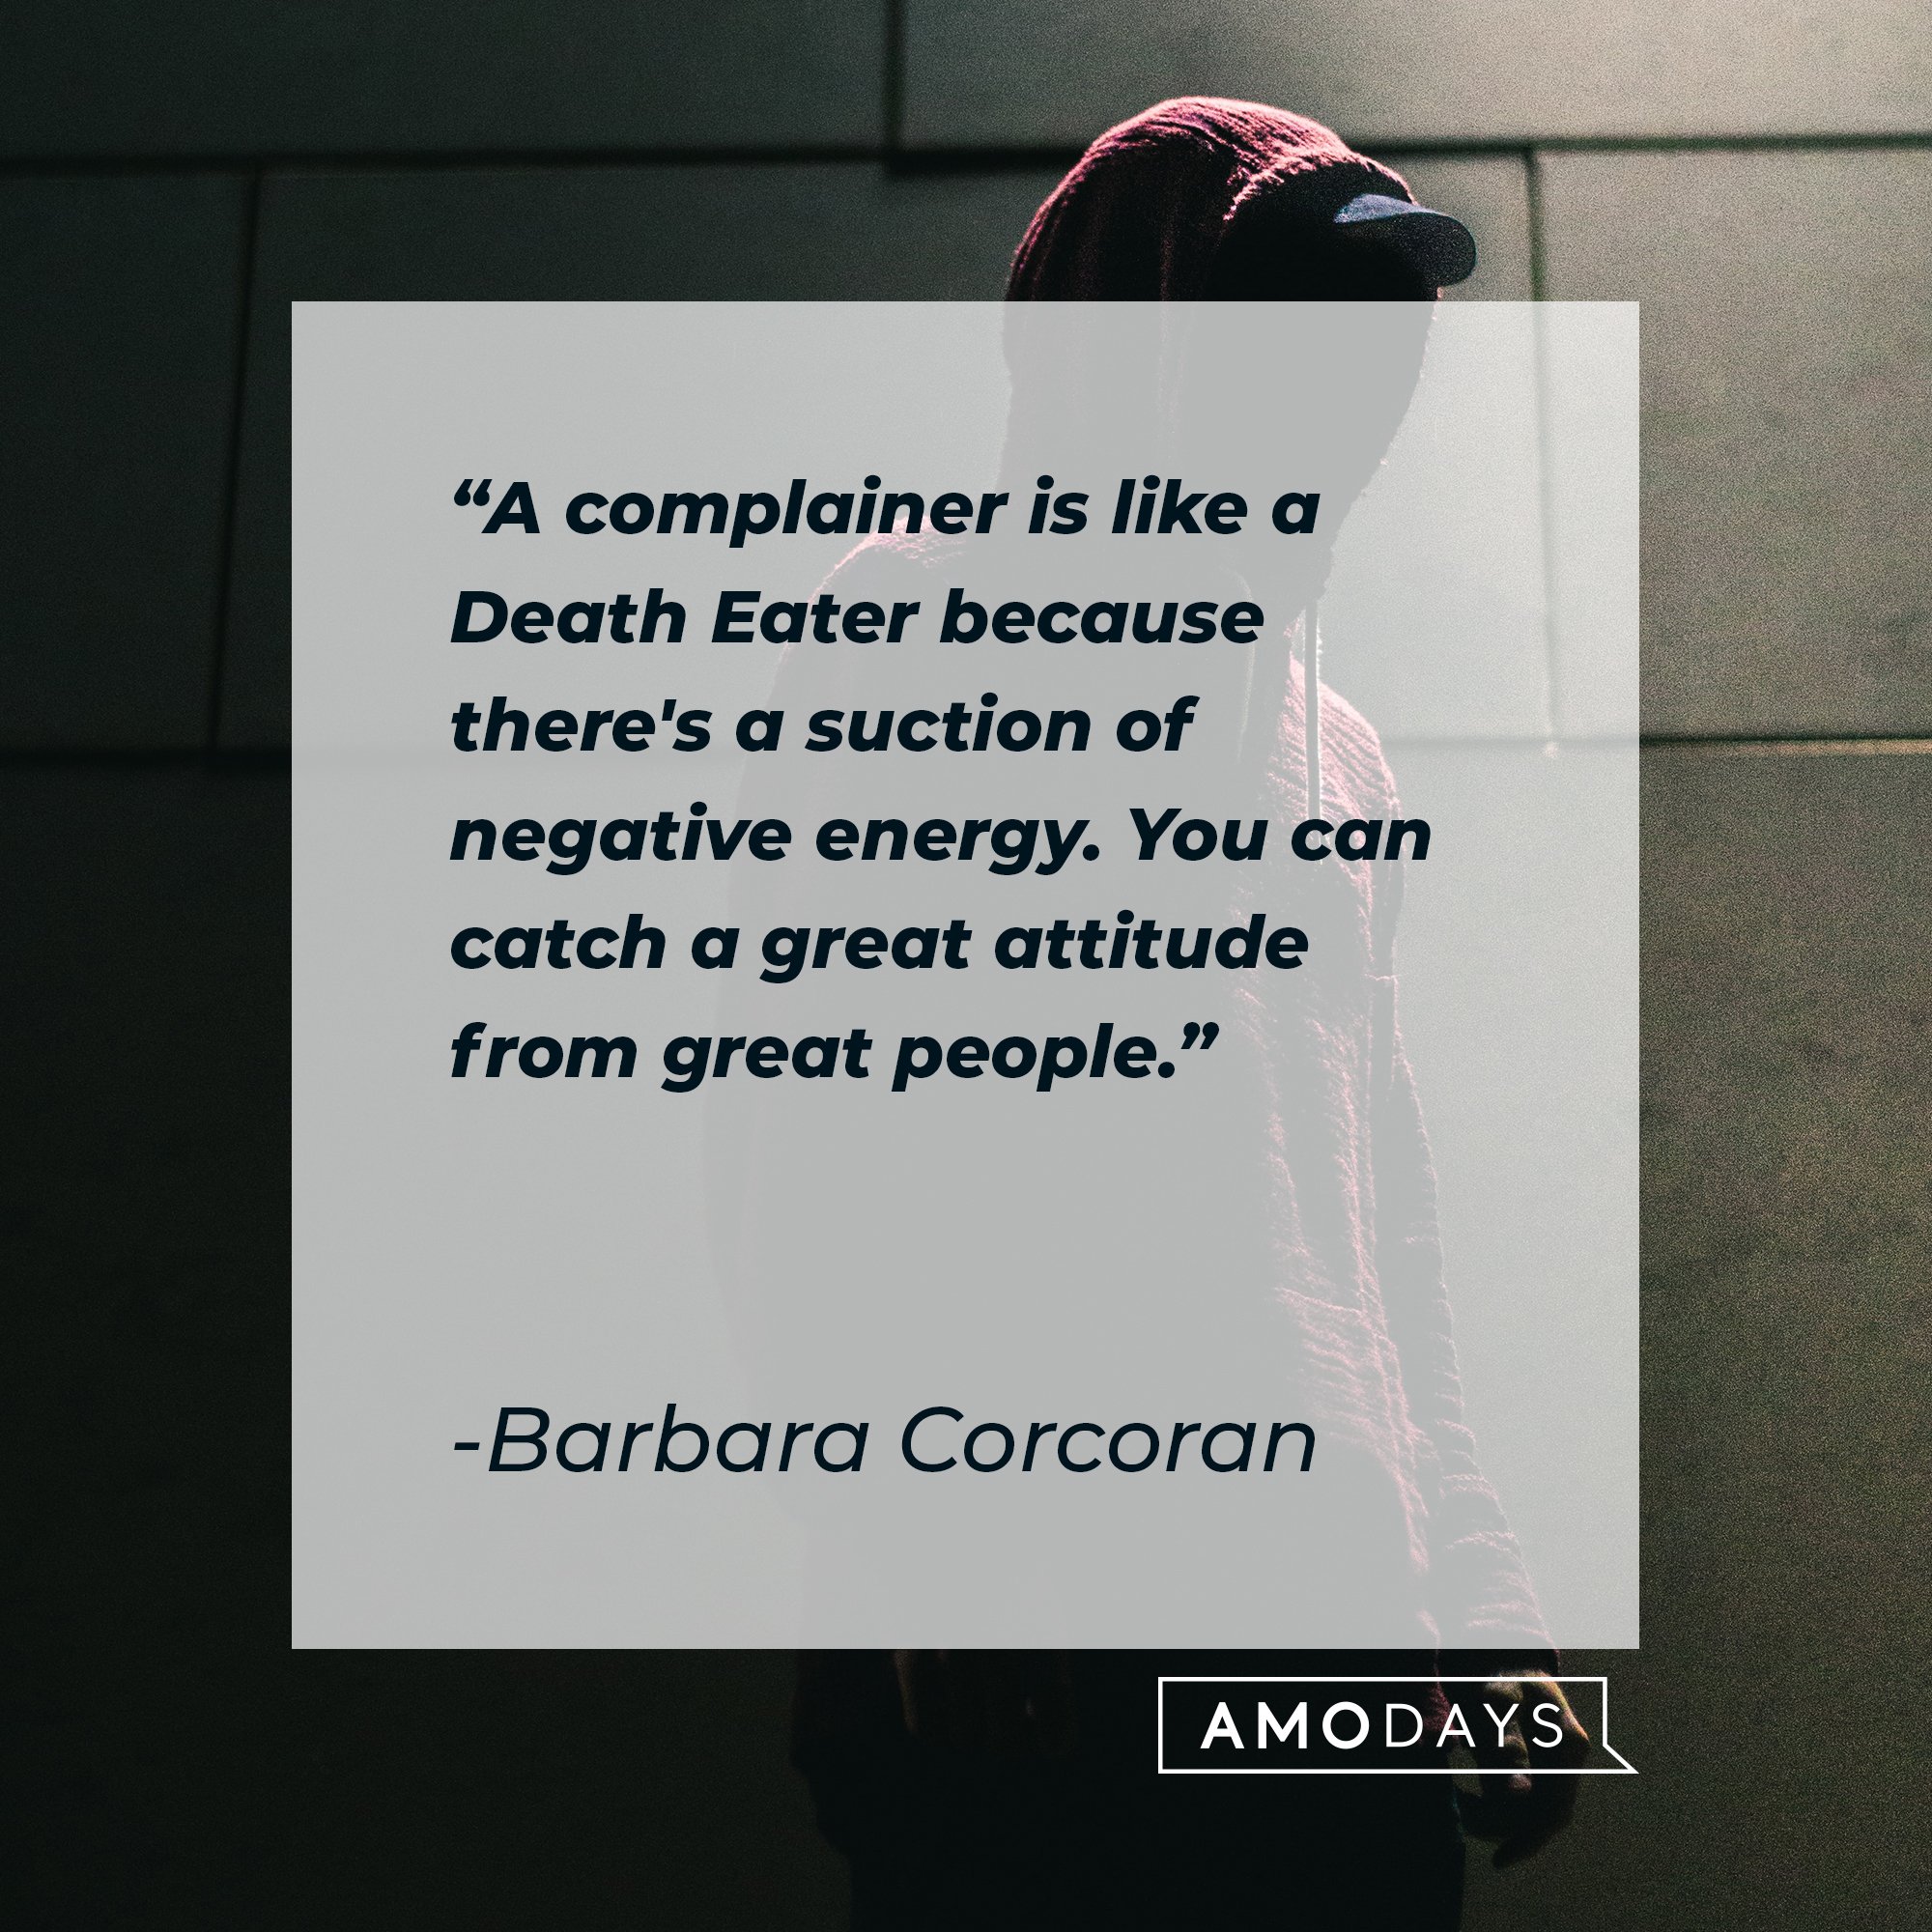 Barbara Corcoran’s quote: "A complainer is like a Death Eater because there's a suction of negative energy. You can catch a great attitude from great people." | Image: AmoDays   